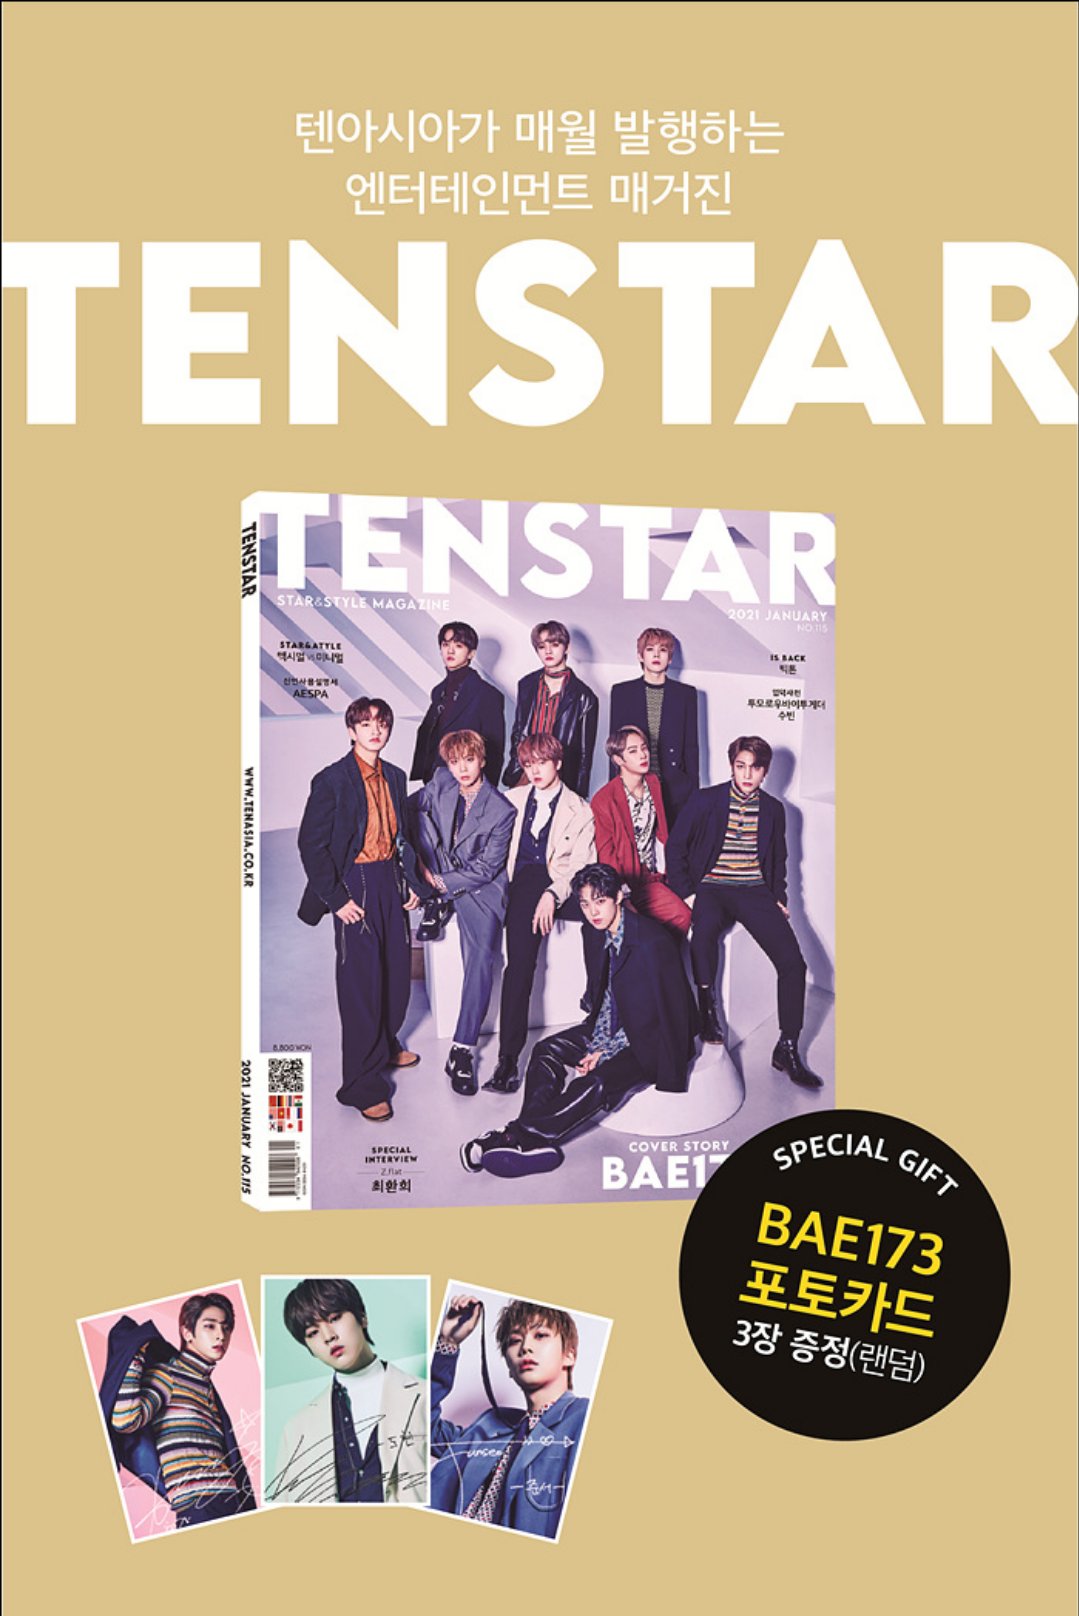 shobey_⚡ on X: "BAE173 for TENSTAR magazine January 2021 issue🤍 "WE ARE  BAE173" - 24P (photoshoot + interview) - special gift of 3 random  photocards #BAE173 #비에이이173 @BAE173_official @BAE173_member  https://t.co/DIRwnEuQUp" / X